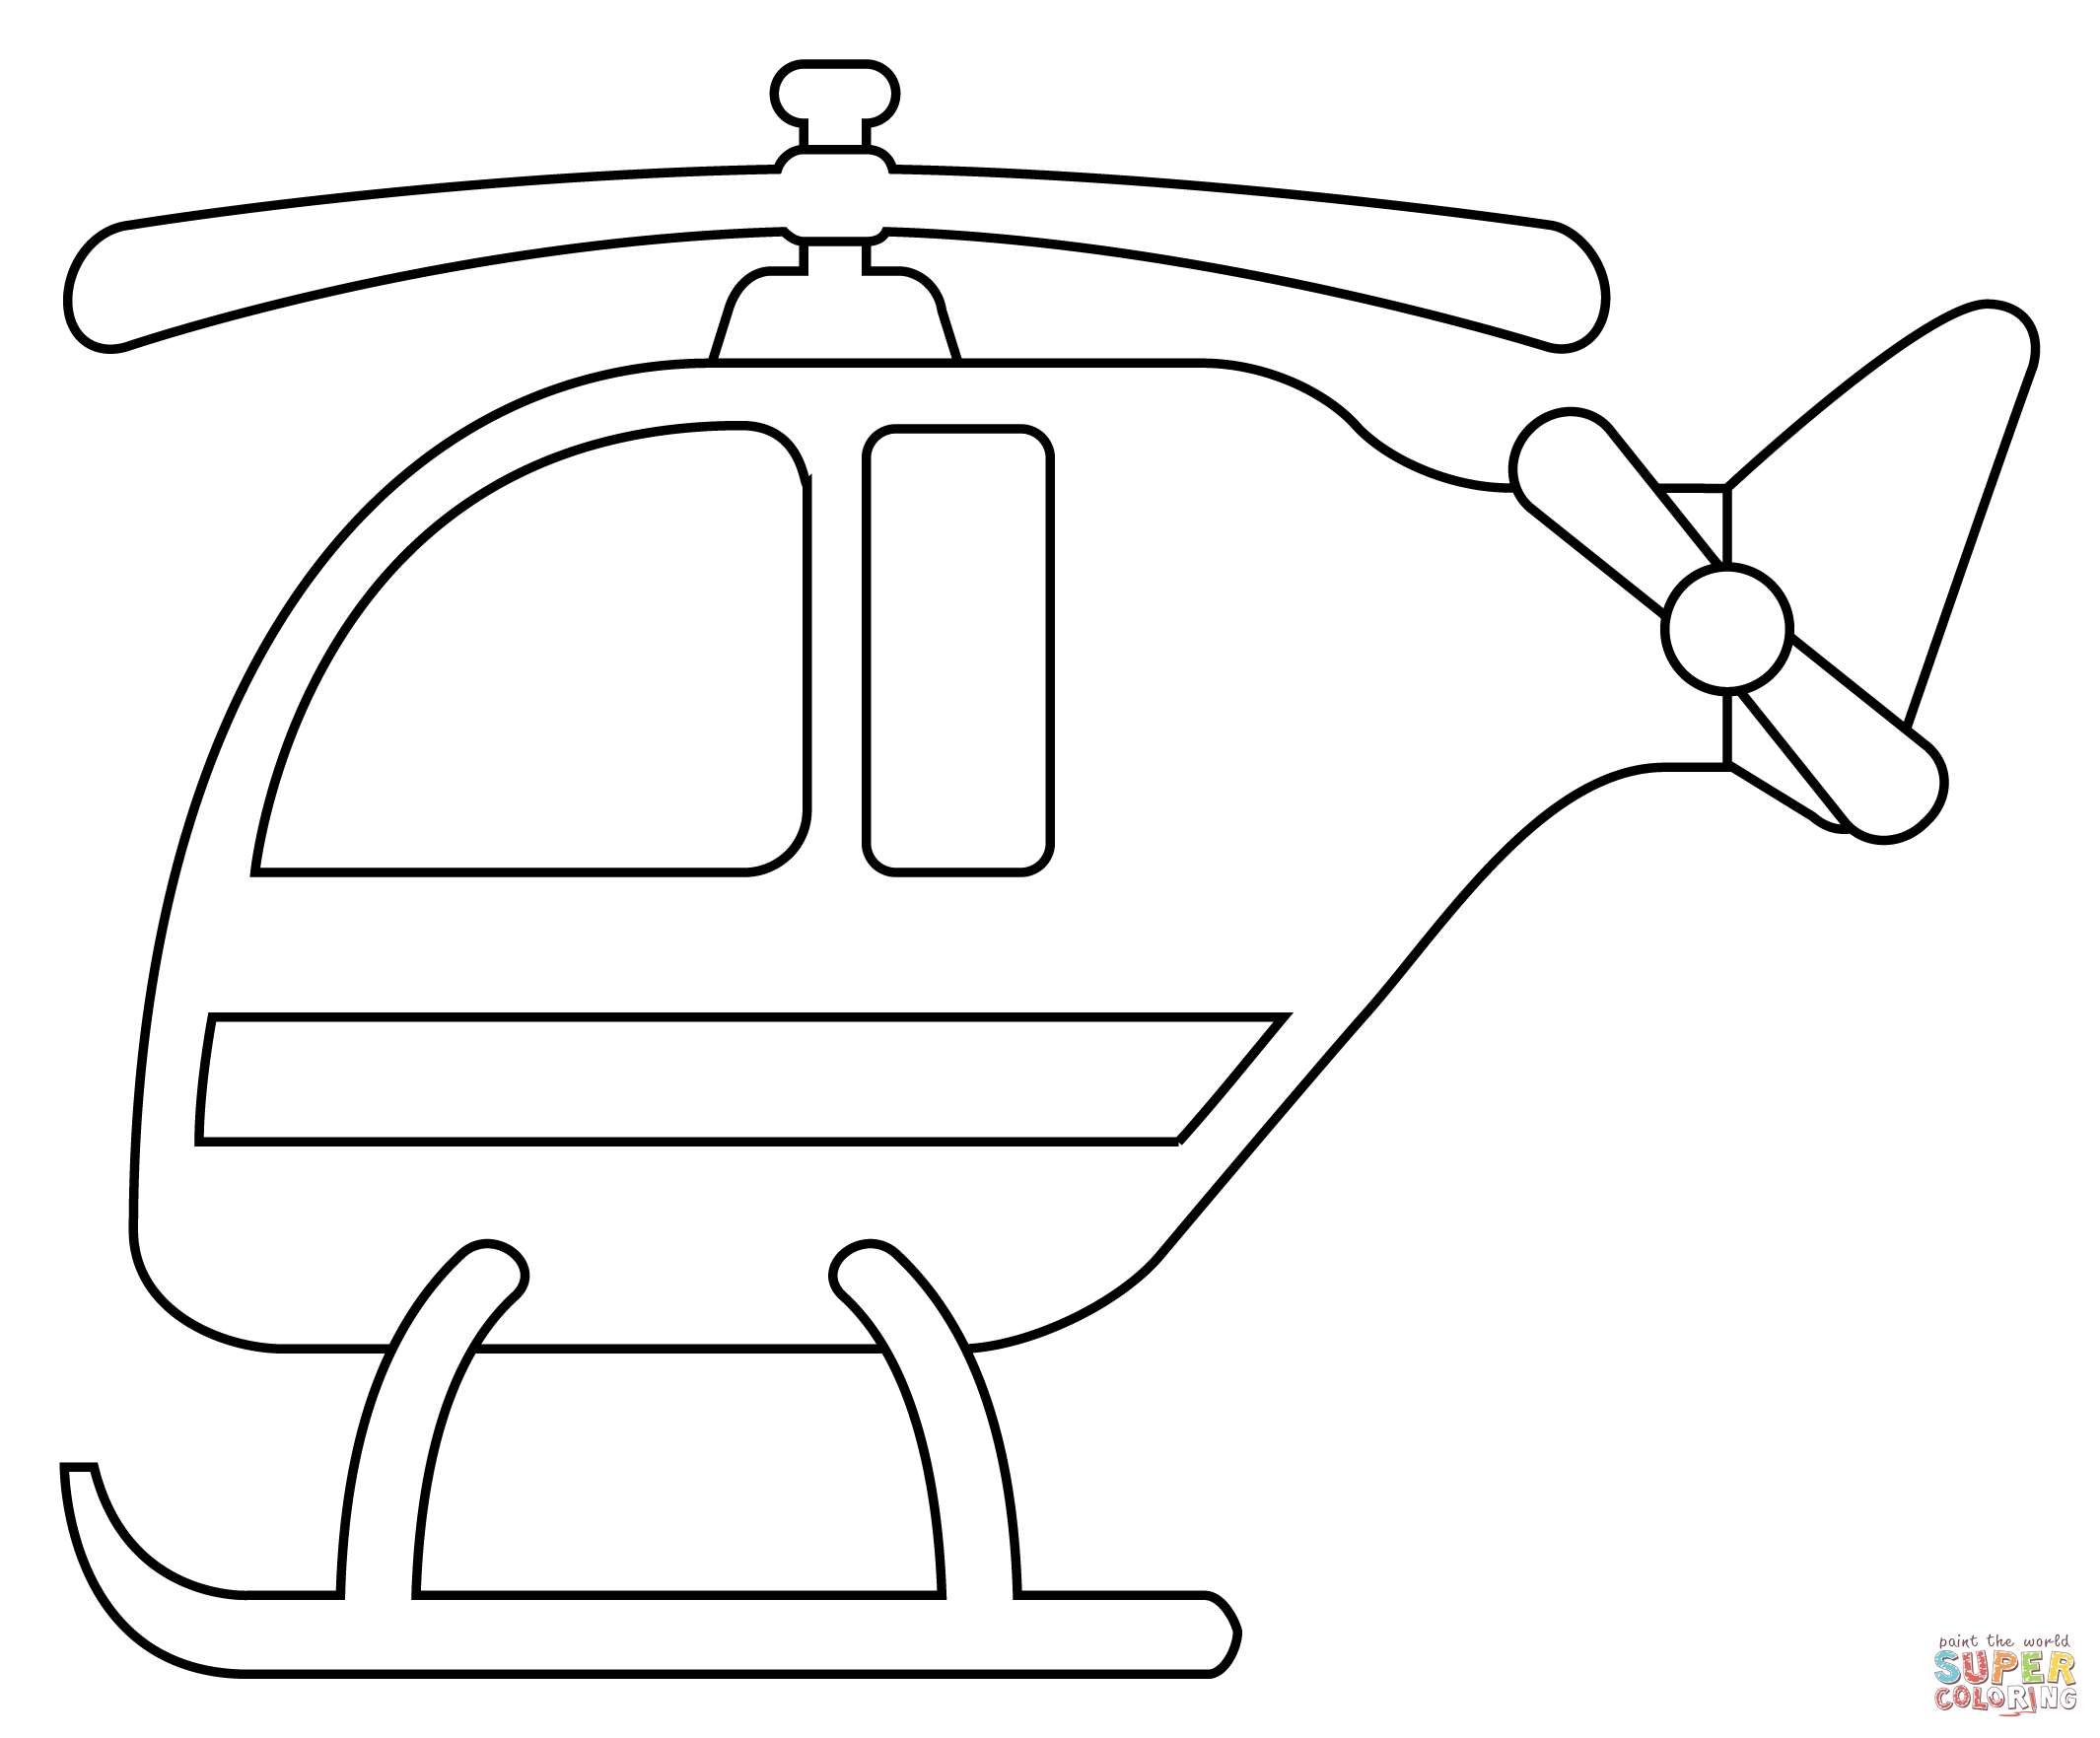 Helicopter coloring page free printable coloring pages